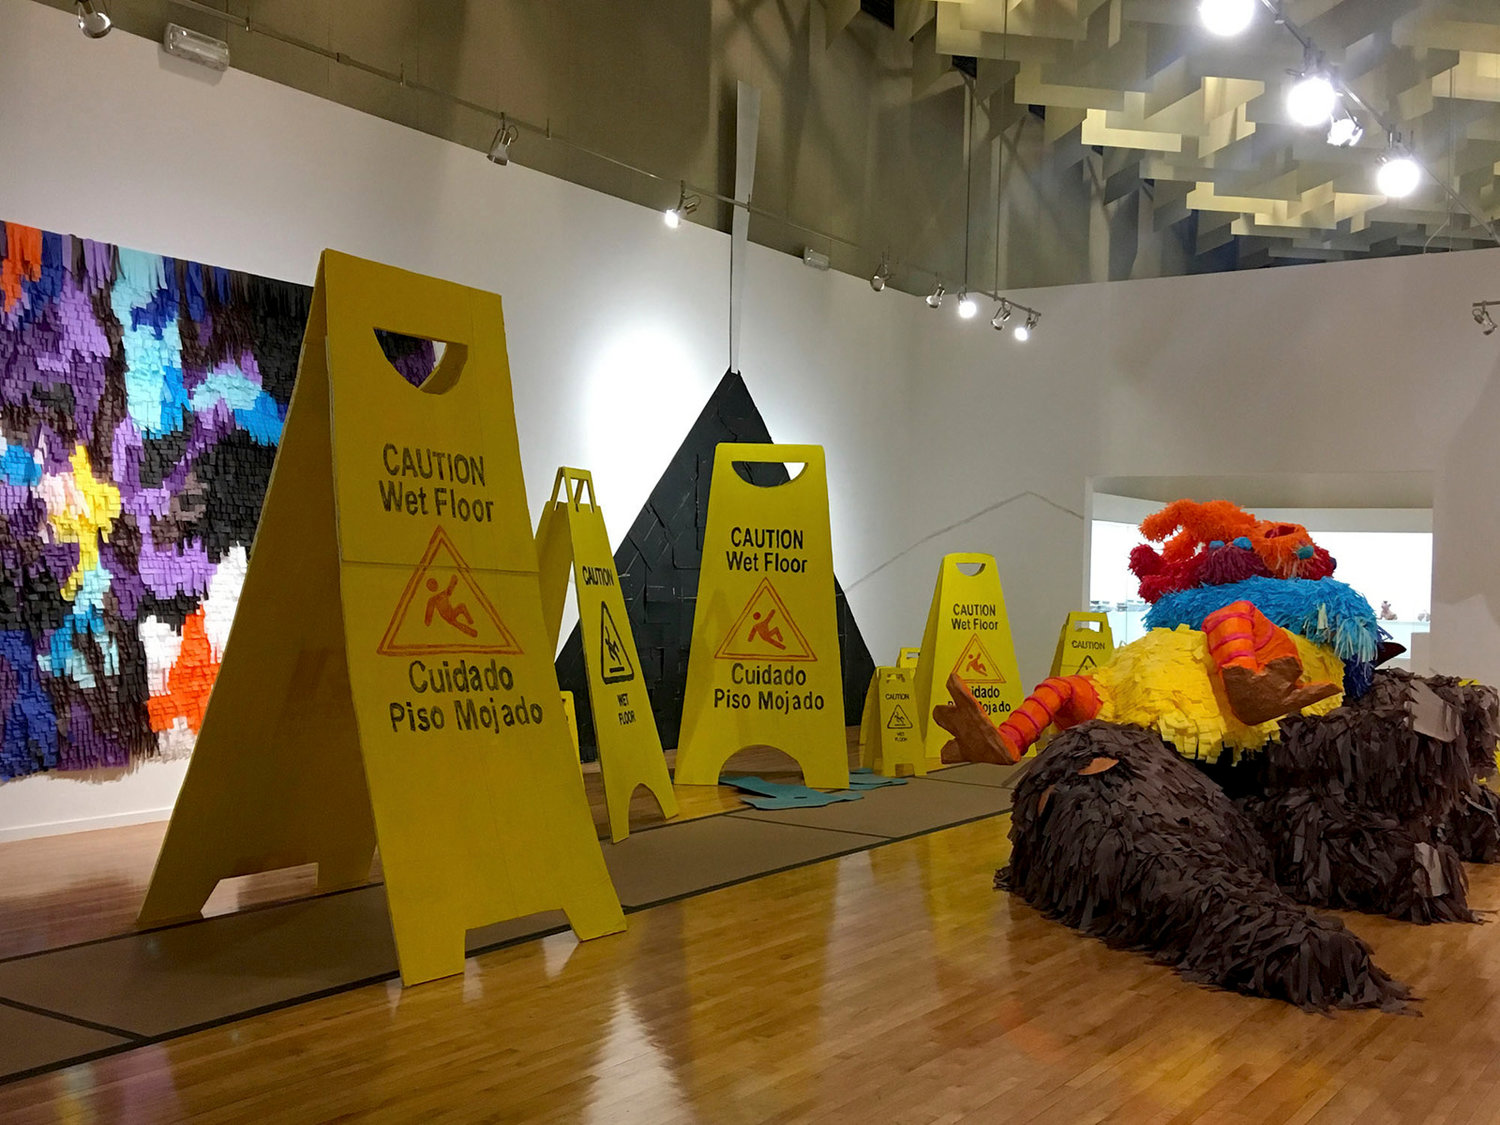 Sorry for the mess, installation view at Marjorie Barrick Museum of Art, Las Vegas, 2019.